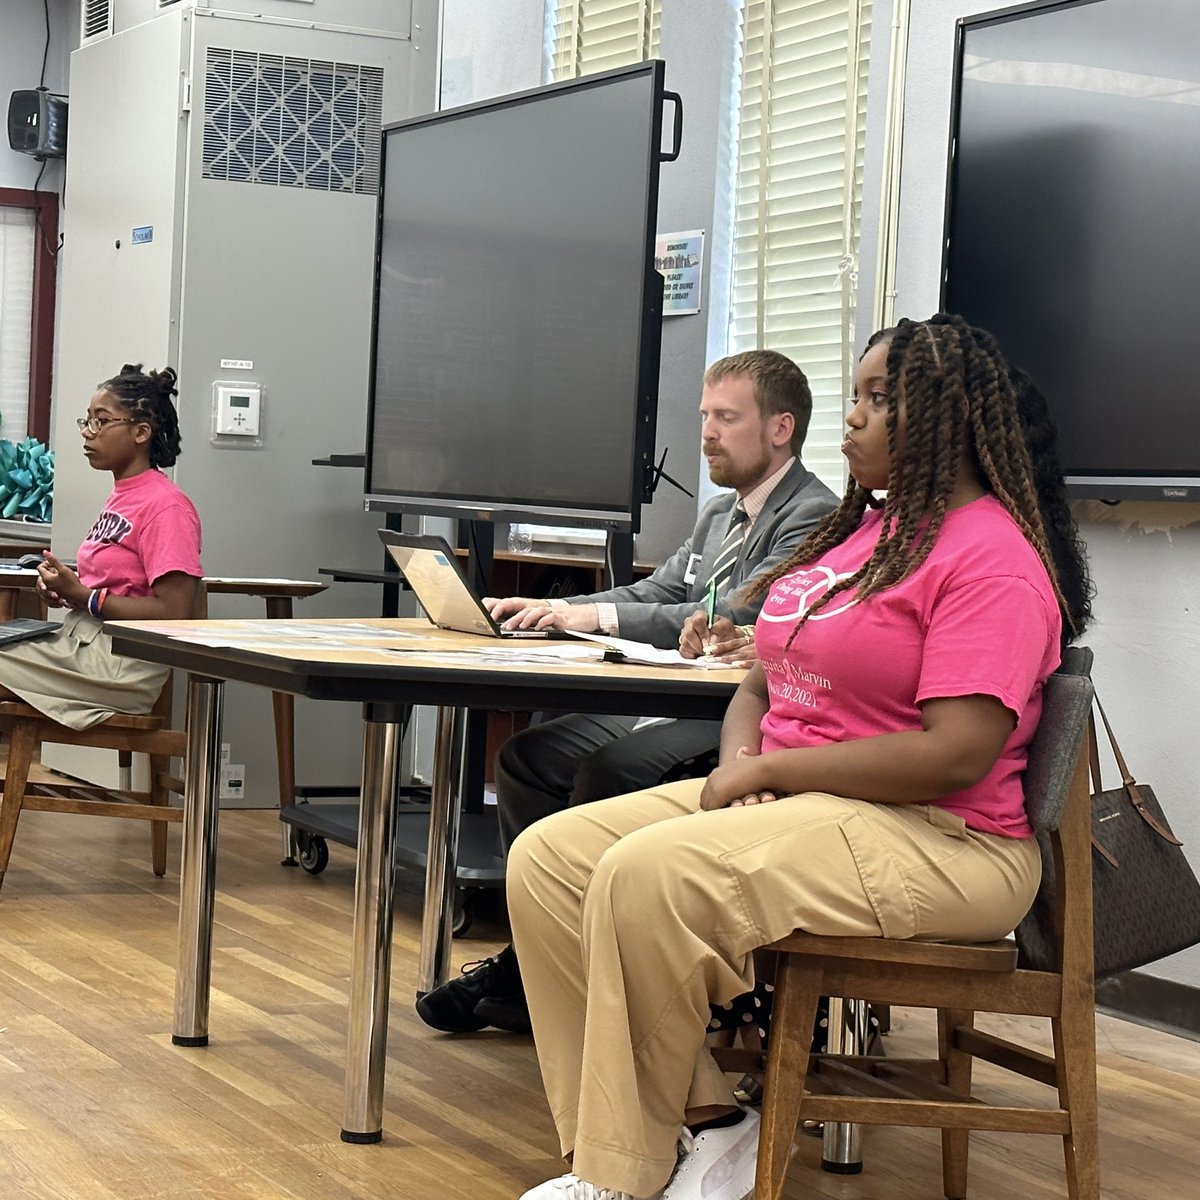 JAG’s Youth in Government students practice their mock trial skills with the help of attorneys Aylia McKee (Public Defender) and Travis Bell.
#JAGSCHOLARS #JAGYIG